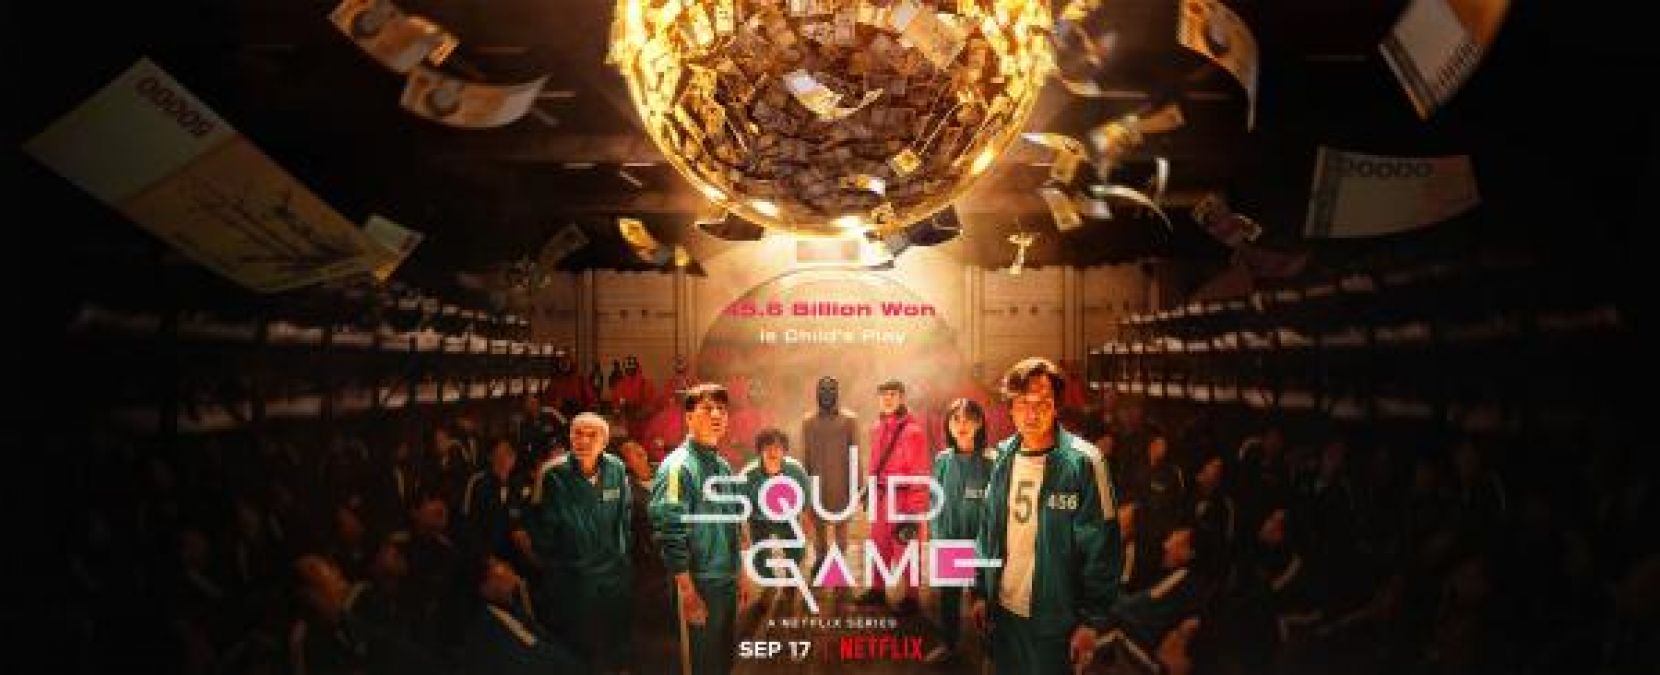 Netflix unveils official poster of 'Squid Game'